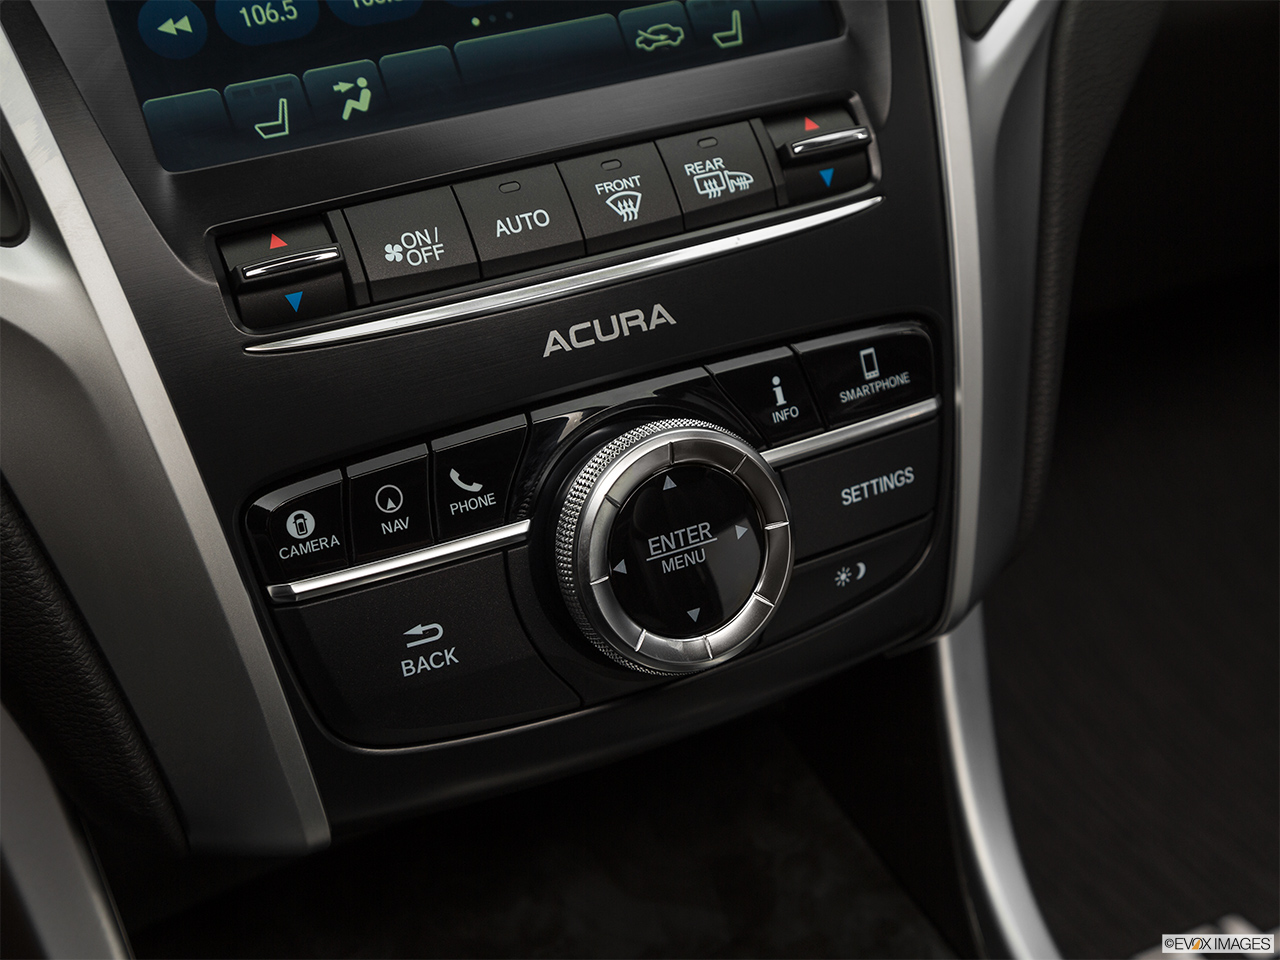 2018 Acura TLX 3.5L System Controls. 